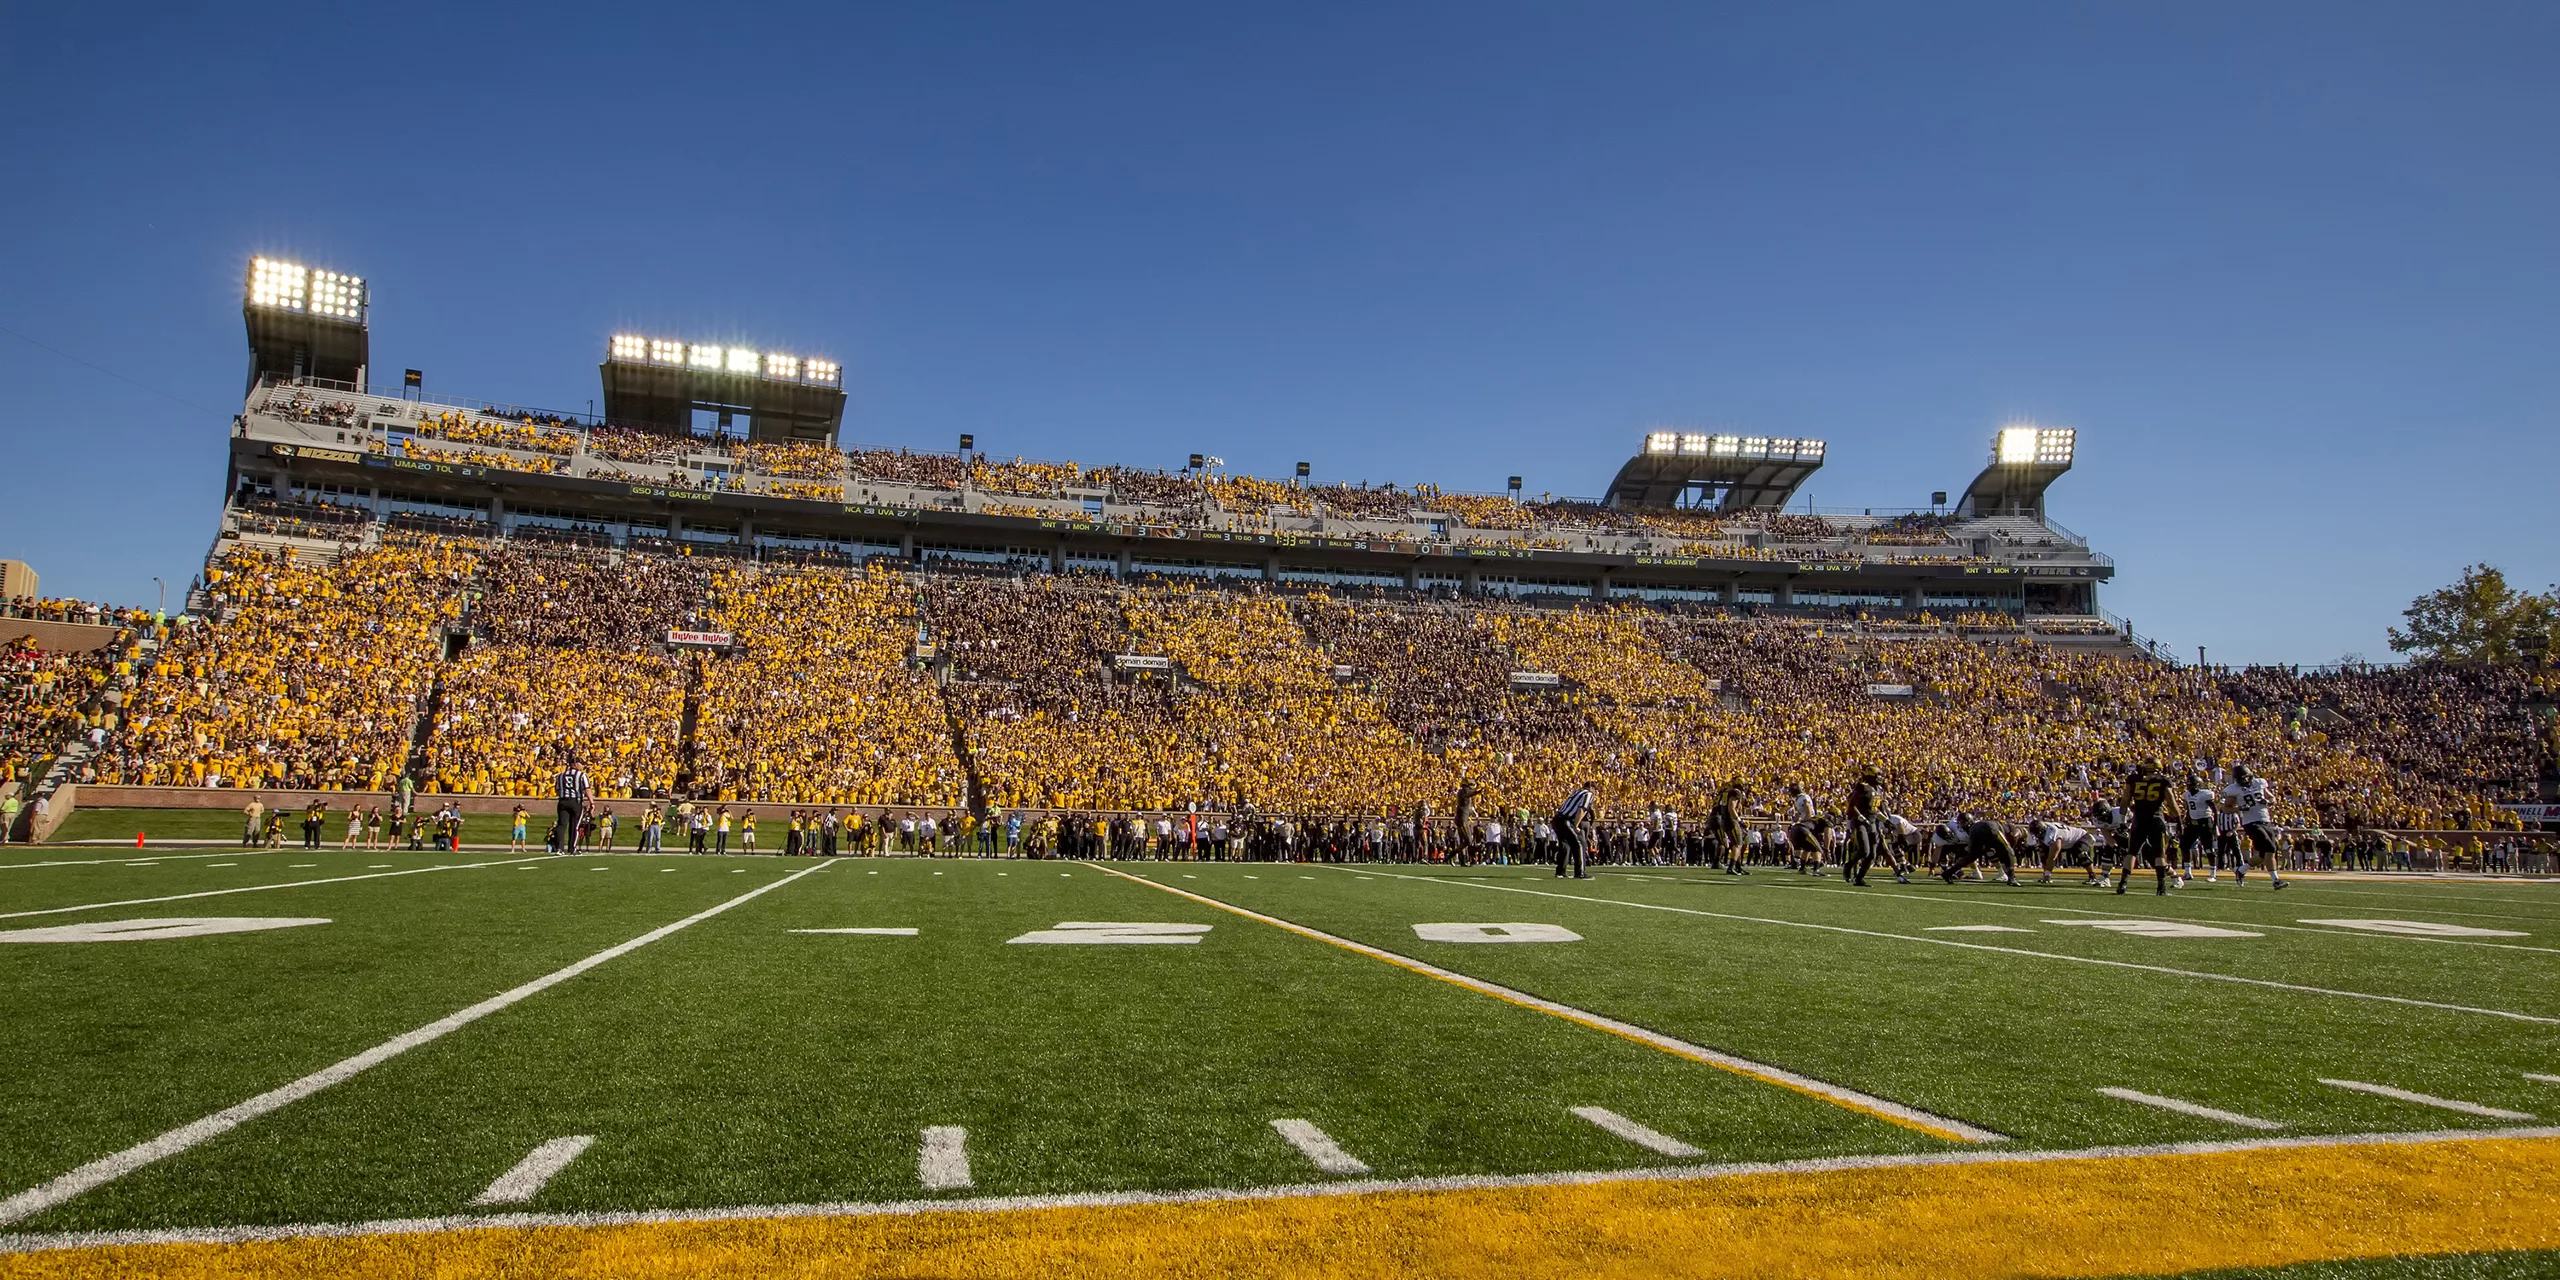 Exterior daylight view looking across the field during a football game at the University of Missouri's Memorial Stadium with a packed stadium in the distance and players on the field